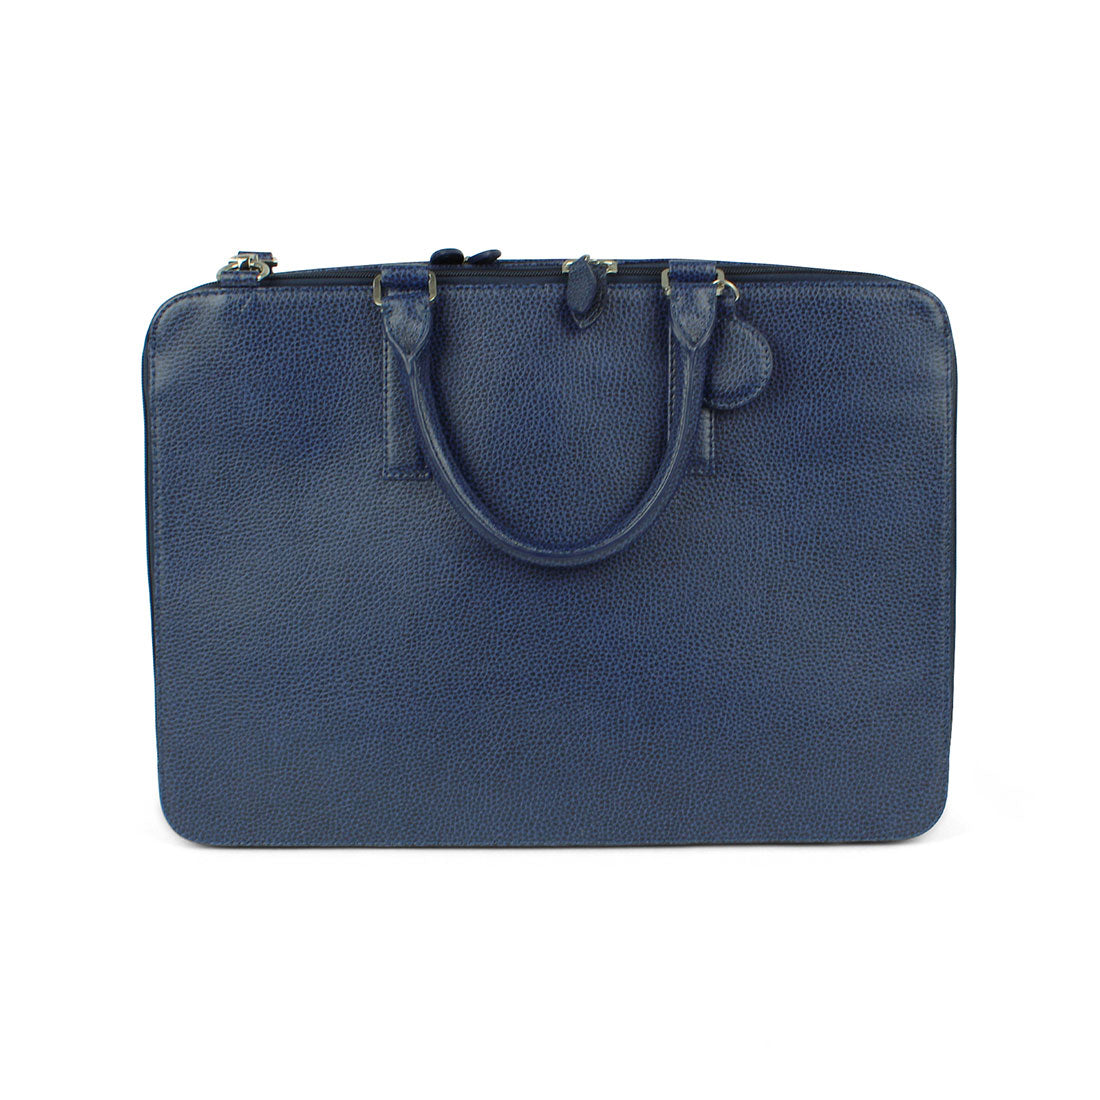 Deluxe Laptop Briefcase -Navy#color_laurige-navy